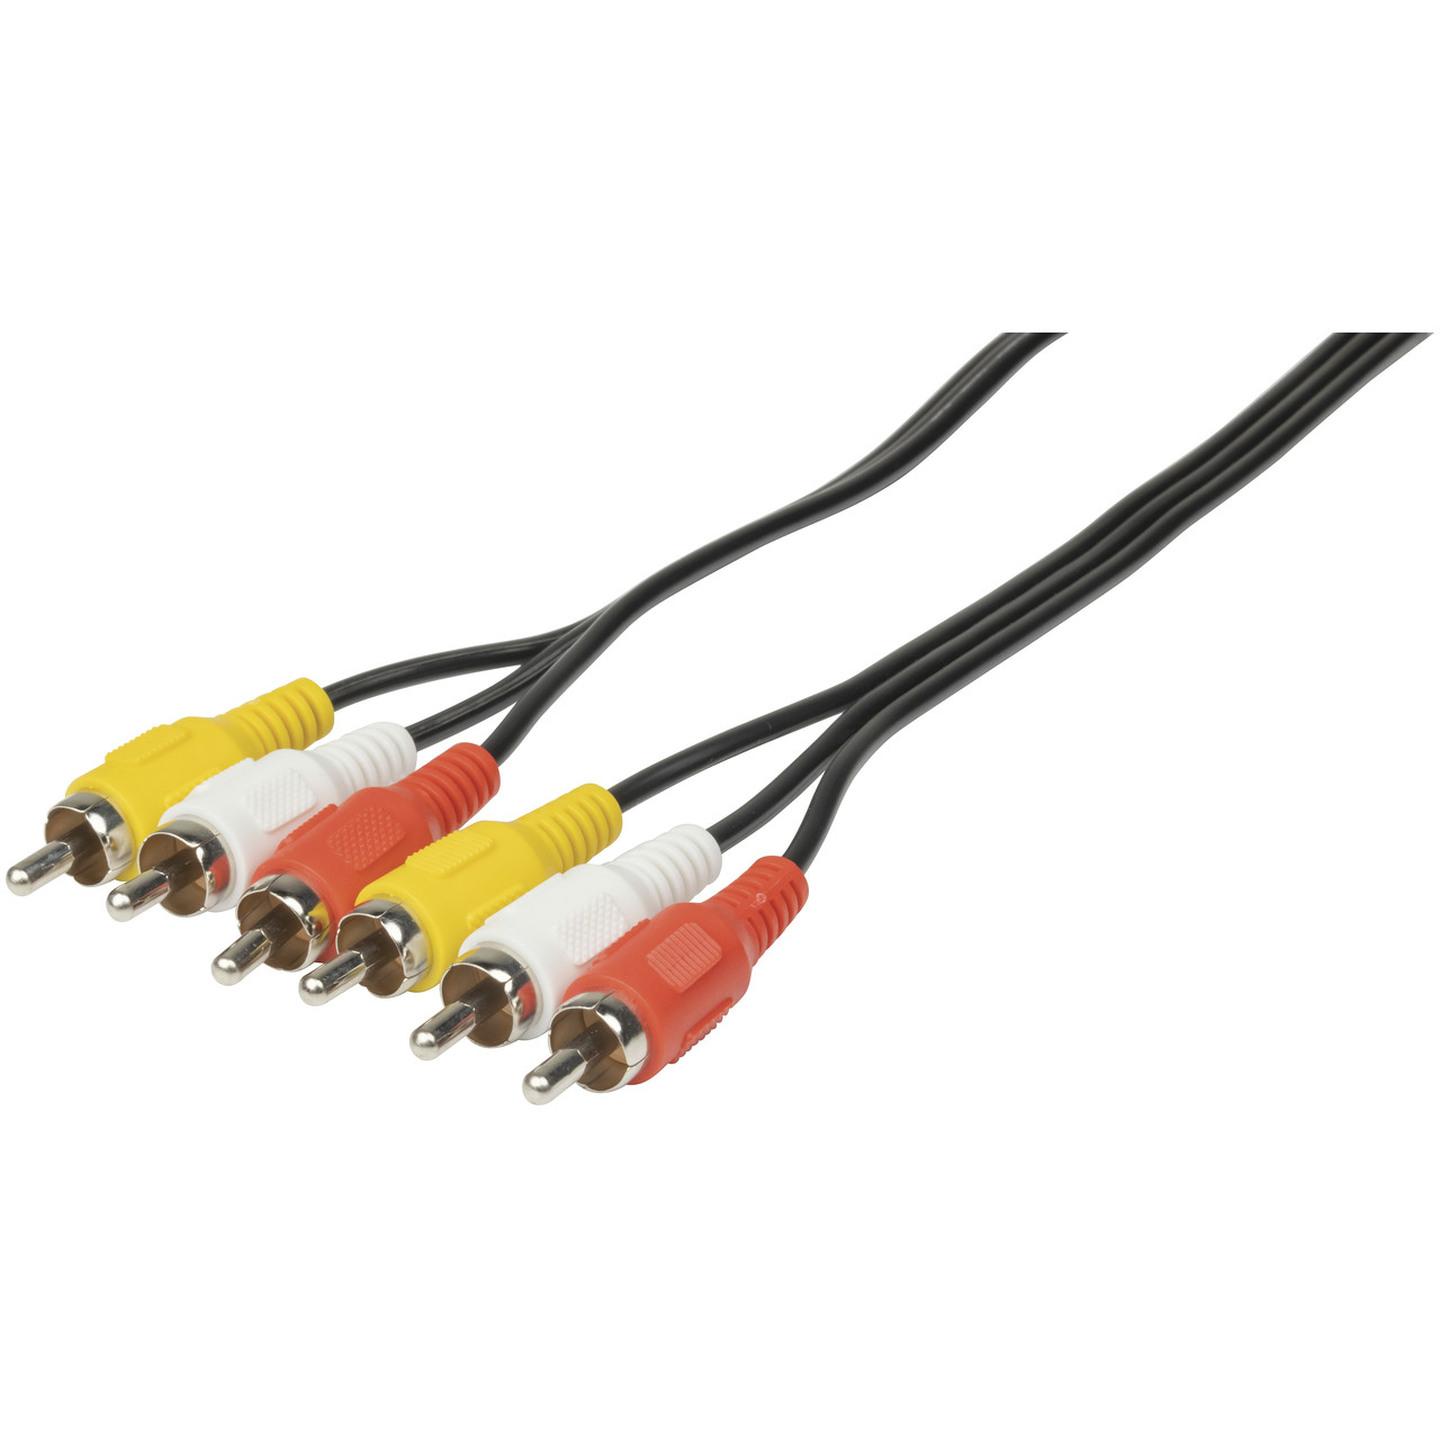 Scart Plug to 6 x RCA Plugs Cable - 1.5m